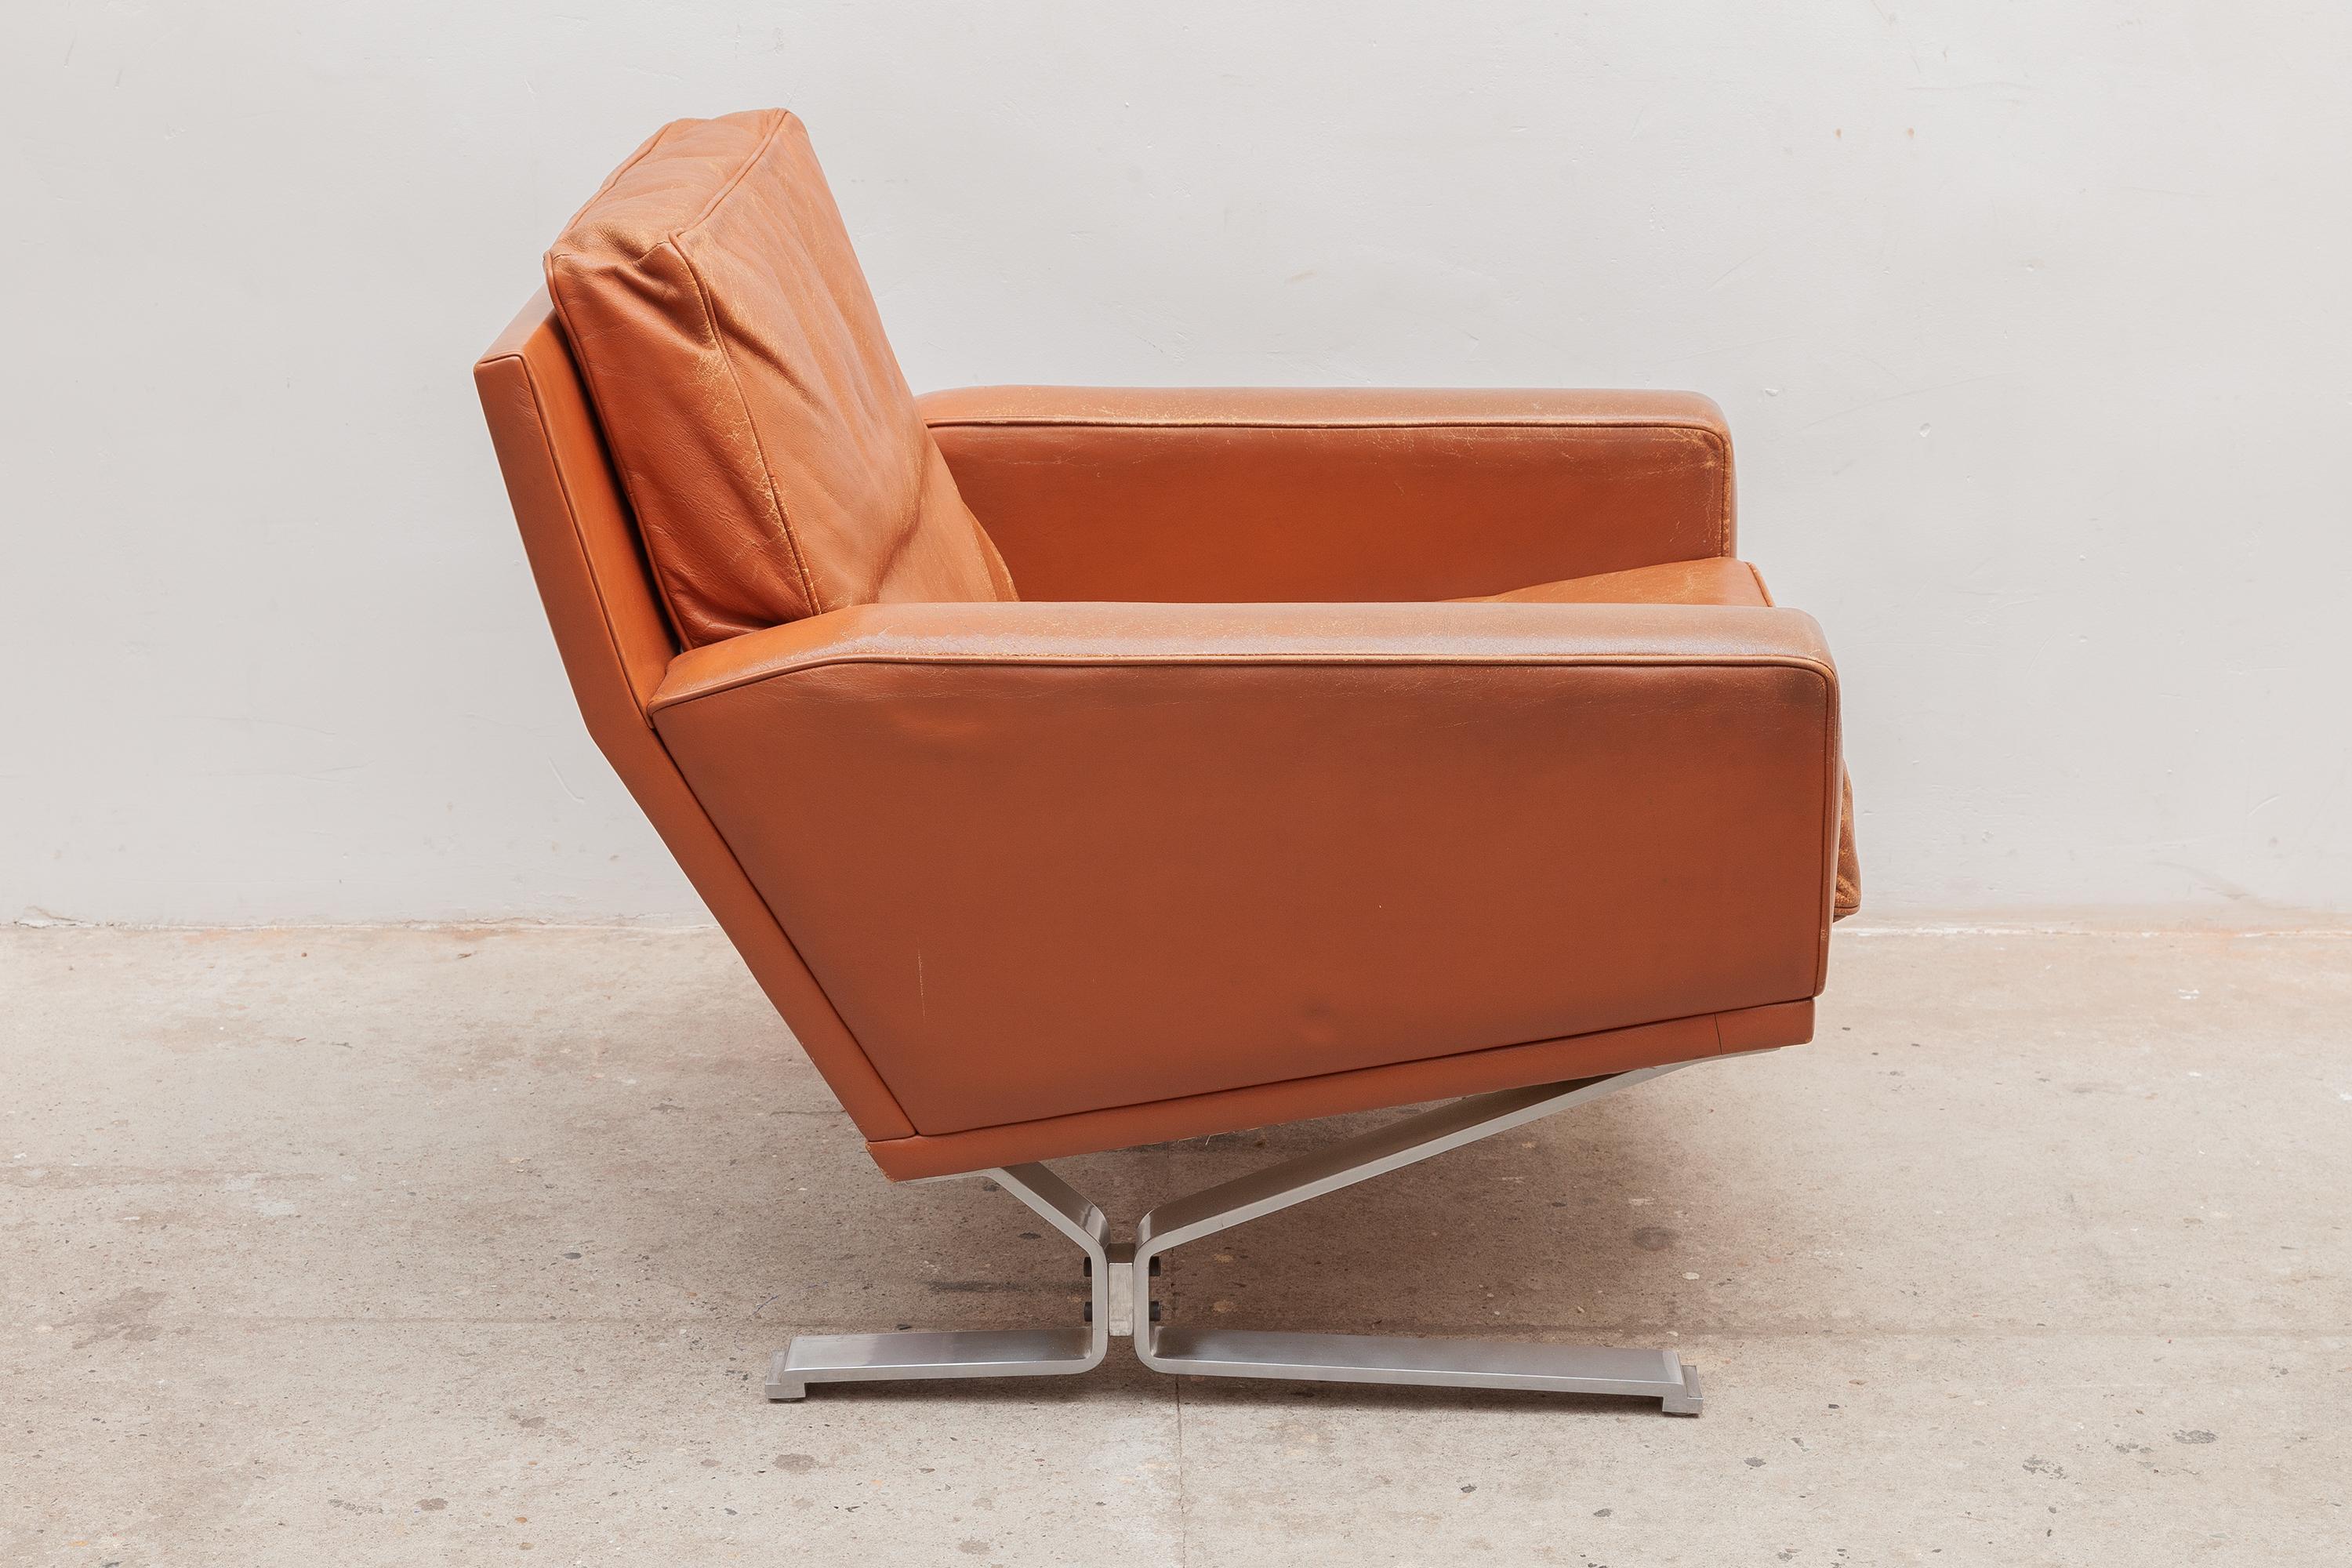 Stainless Steel Mid-Century Modern Cognac Leather Club Chairs 1960s with a Nice Patina